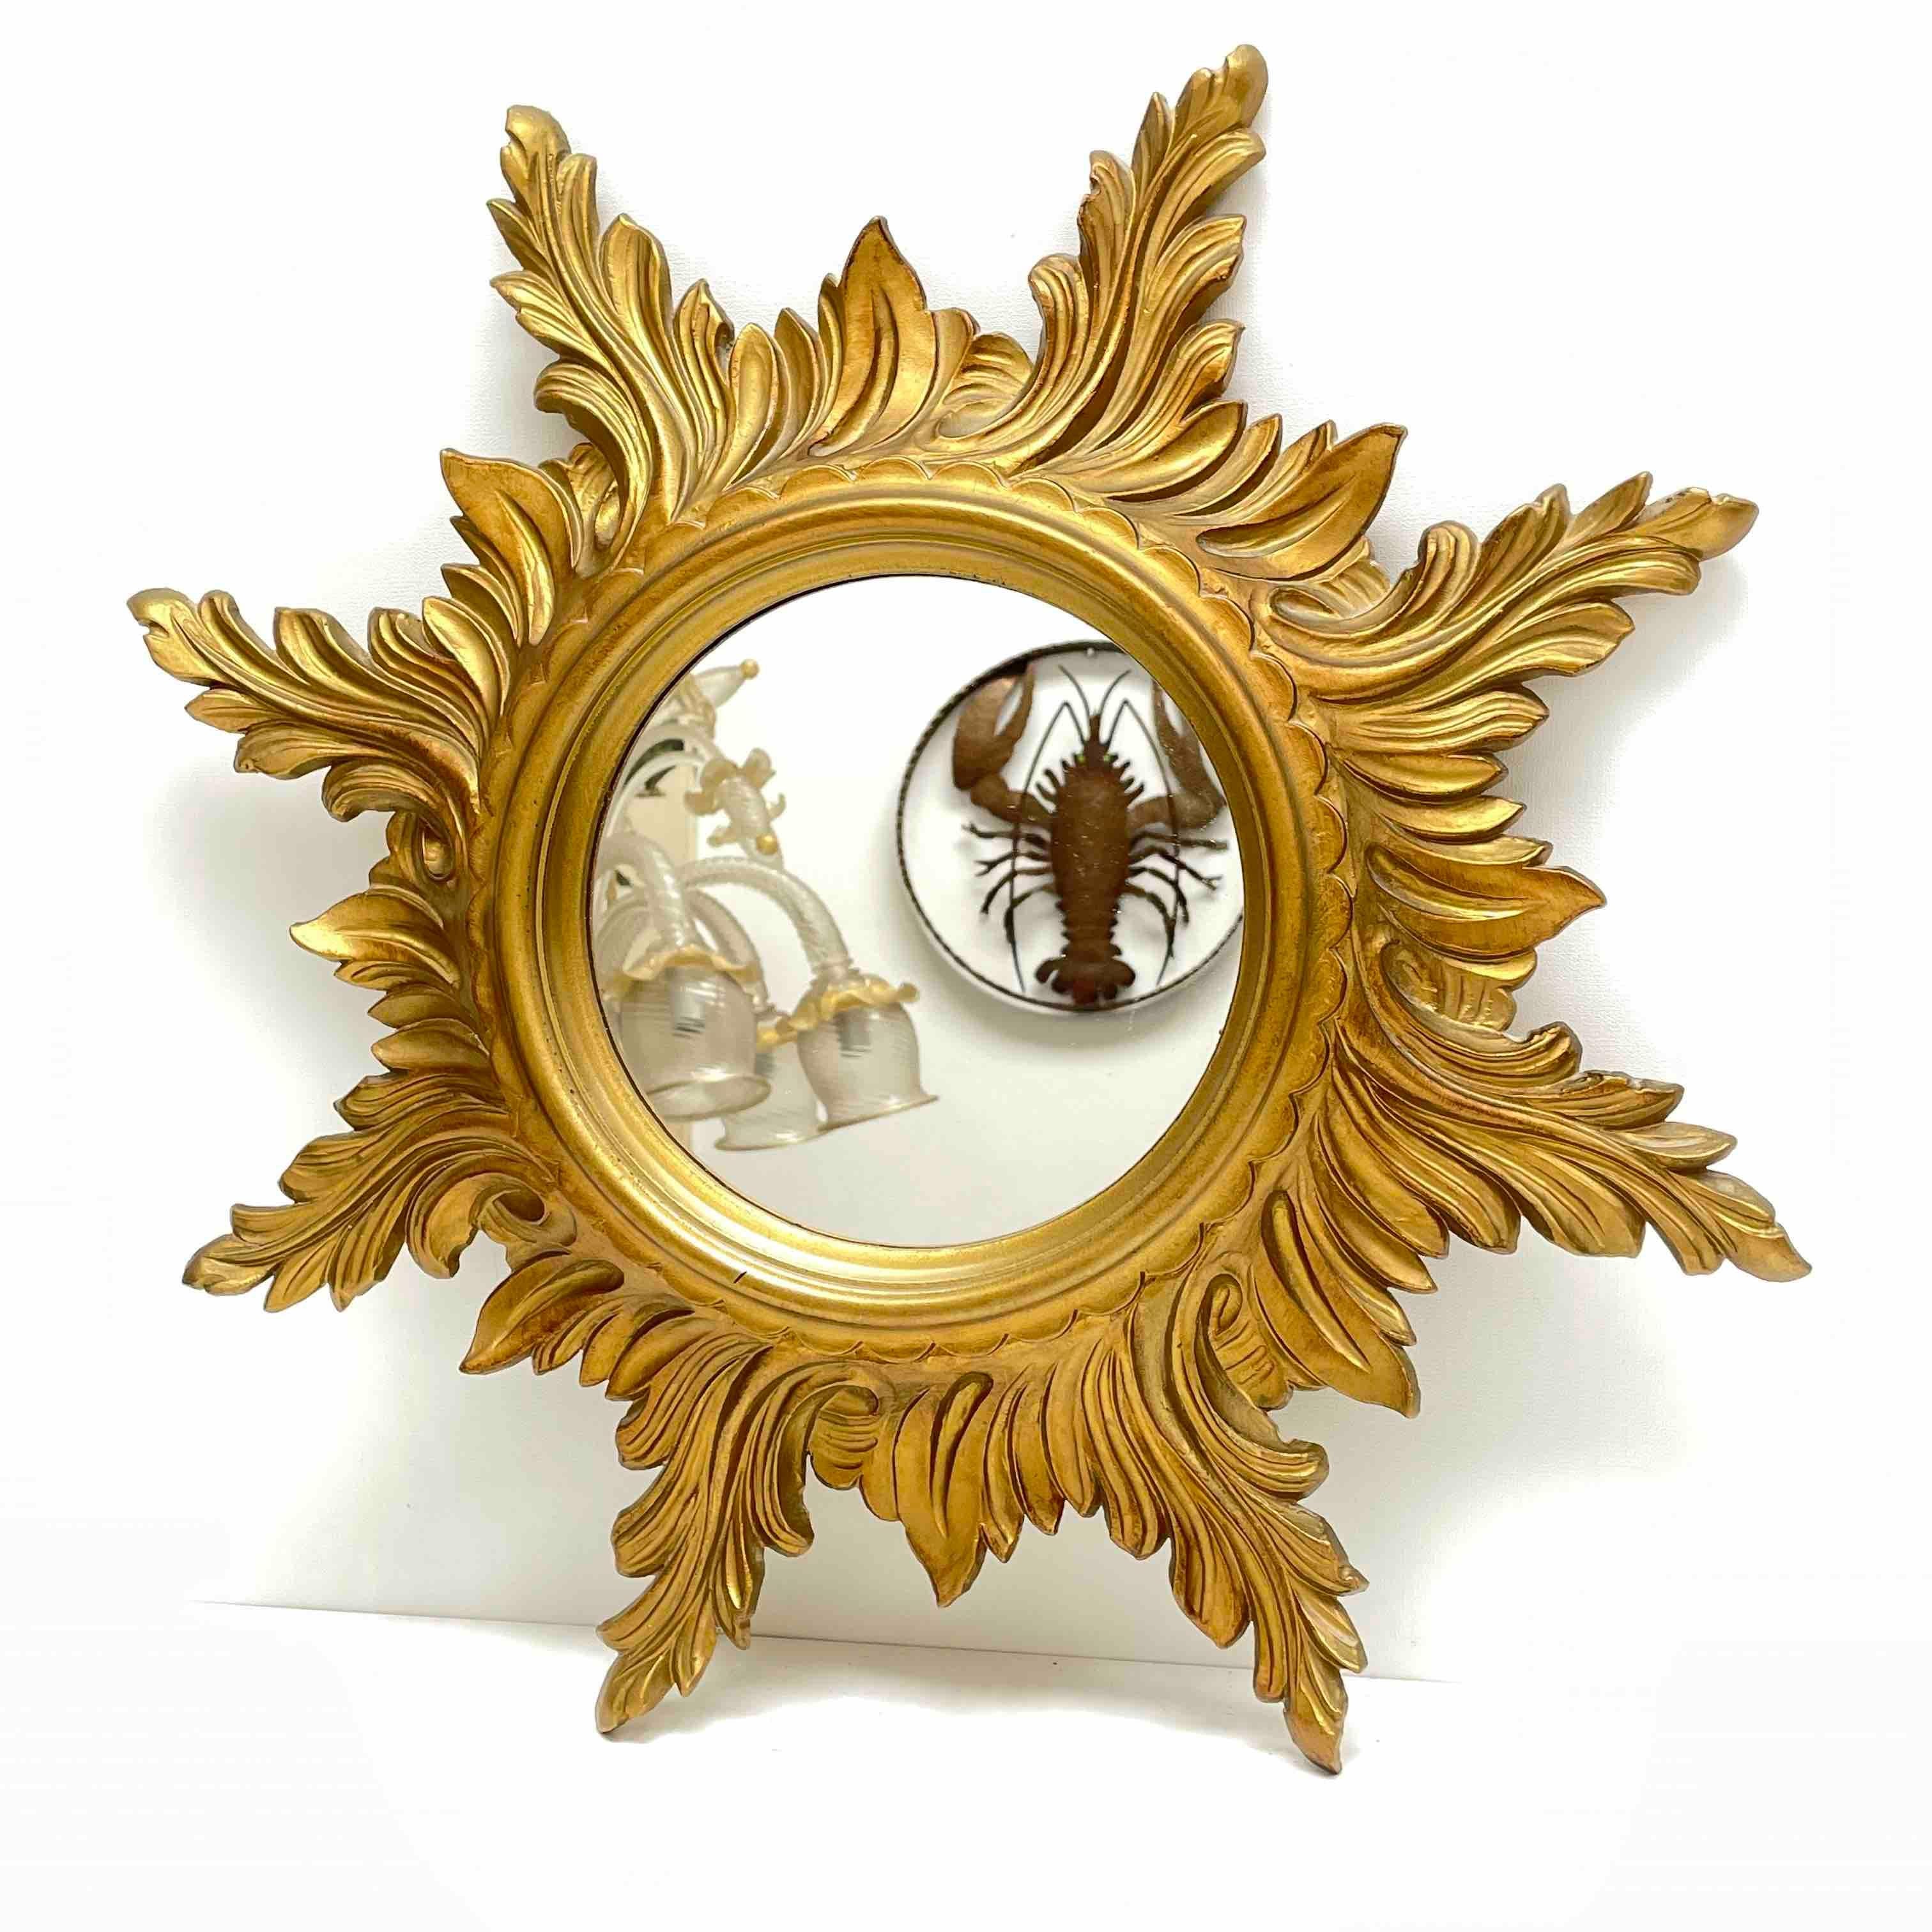 A gorgeous starburst mirror. Made of resin. No chips, no cracks, no repairs. It measures approximate 19.25